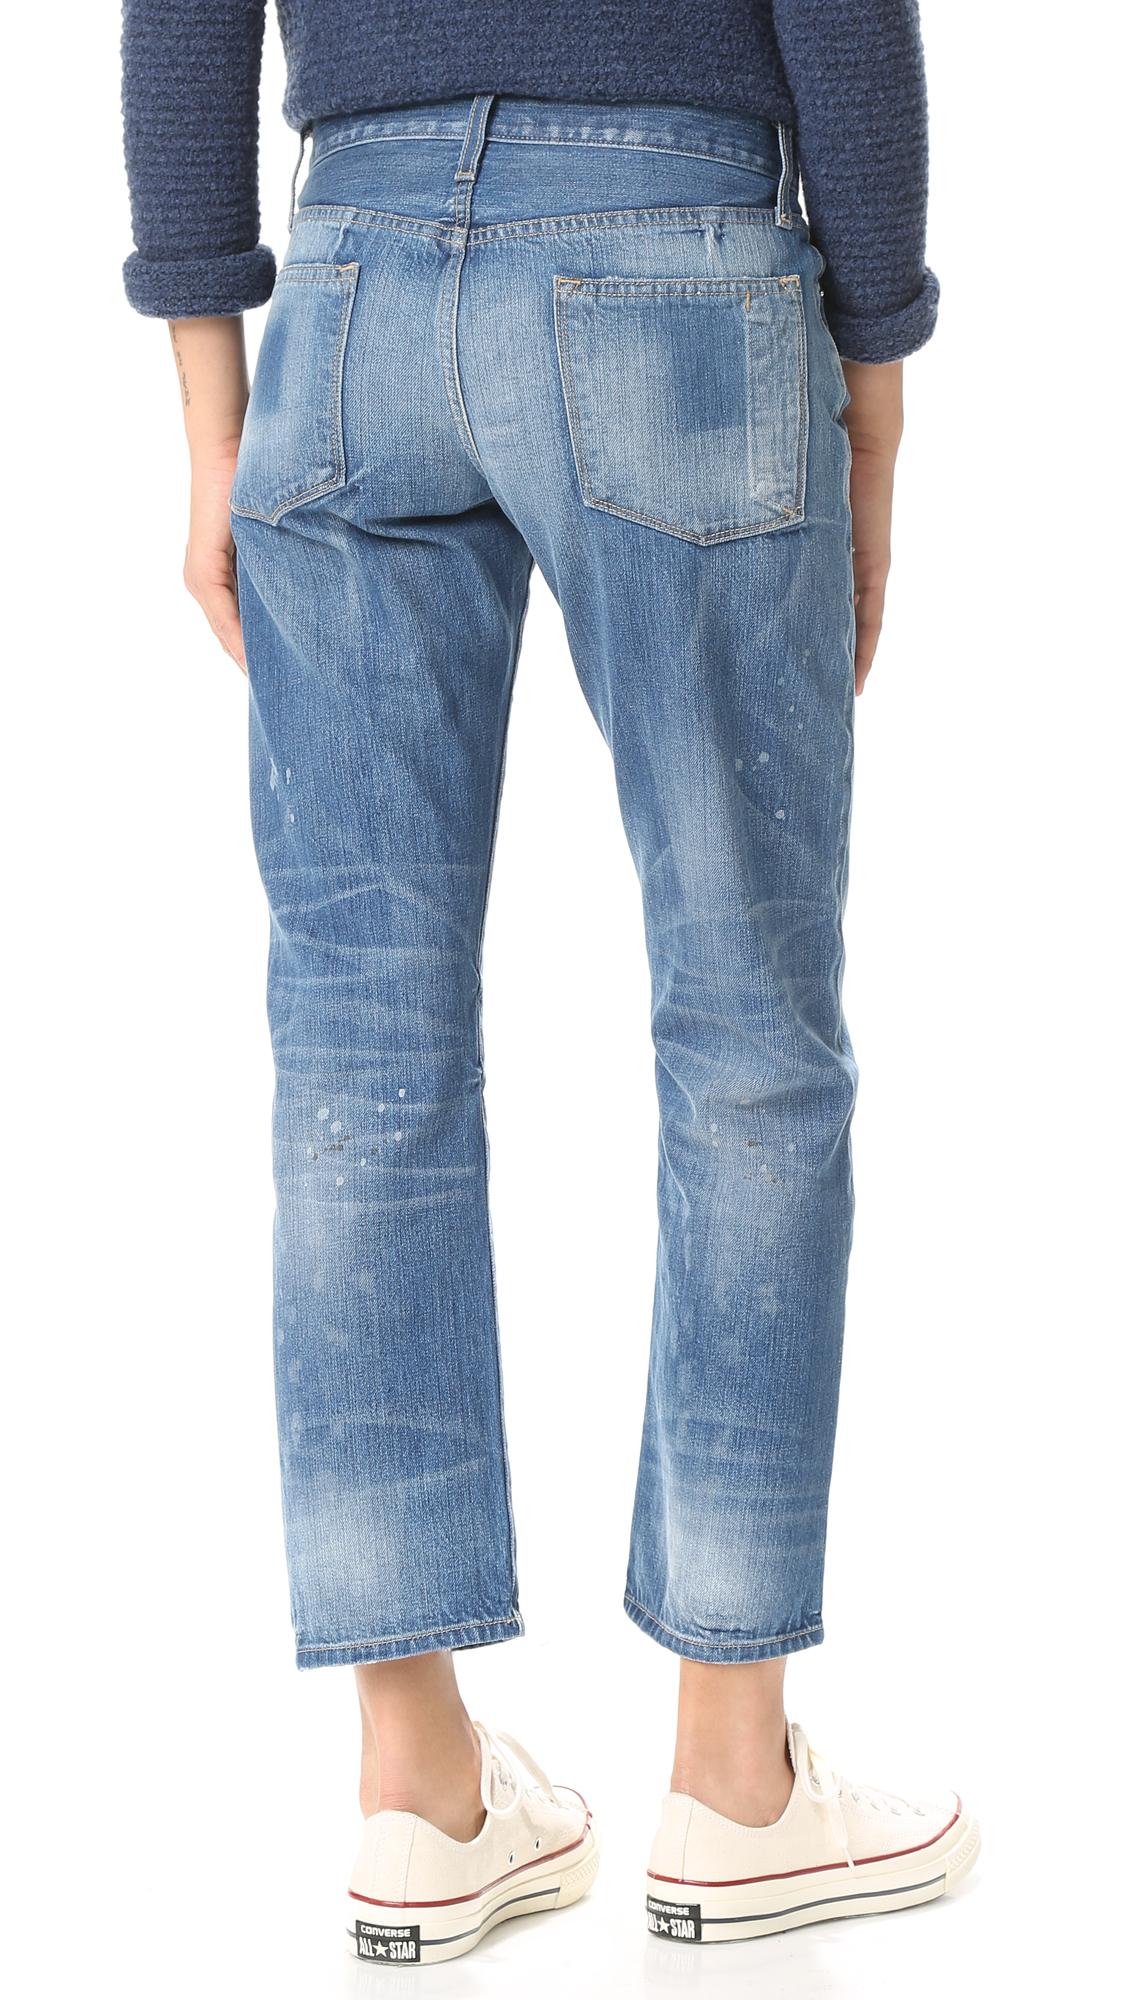 ae crossover jeans